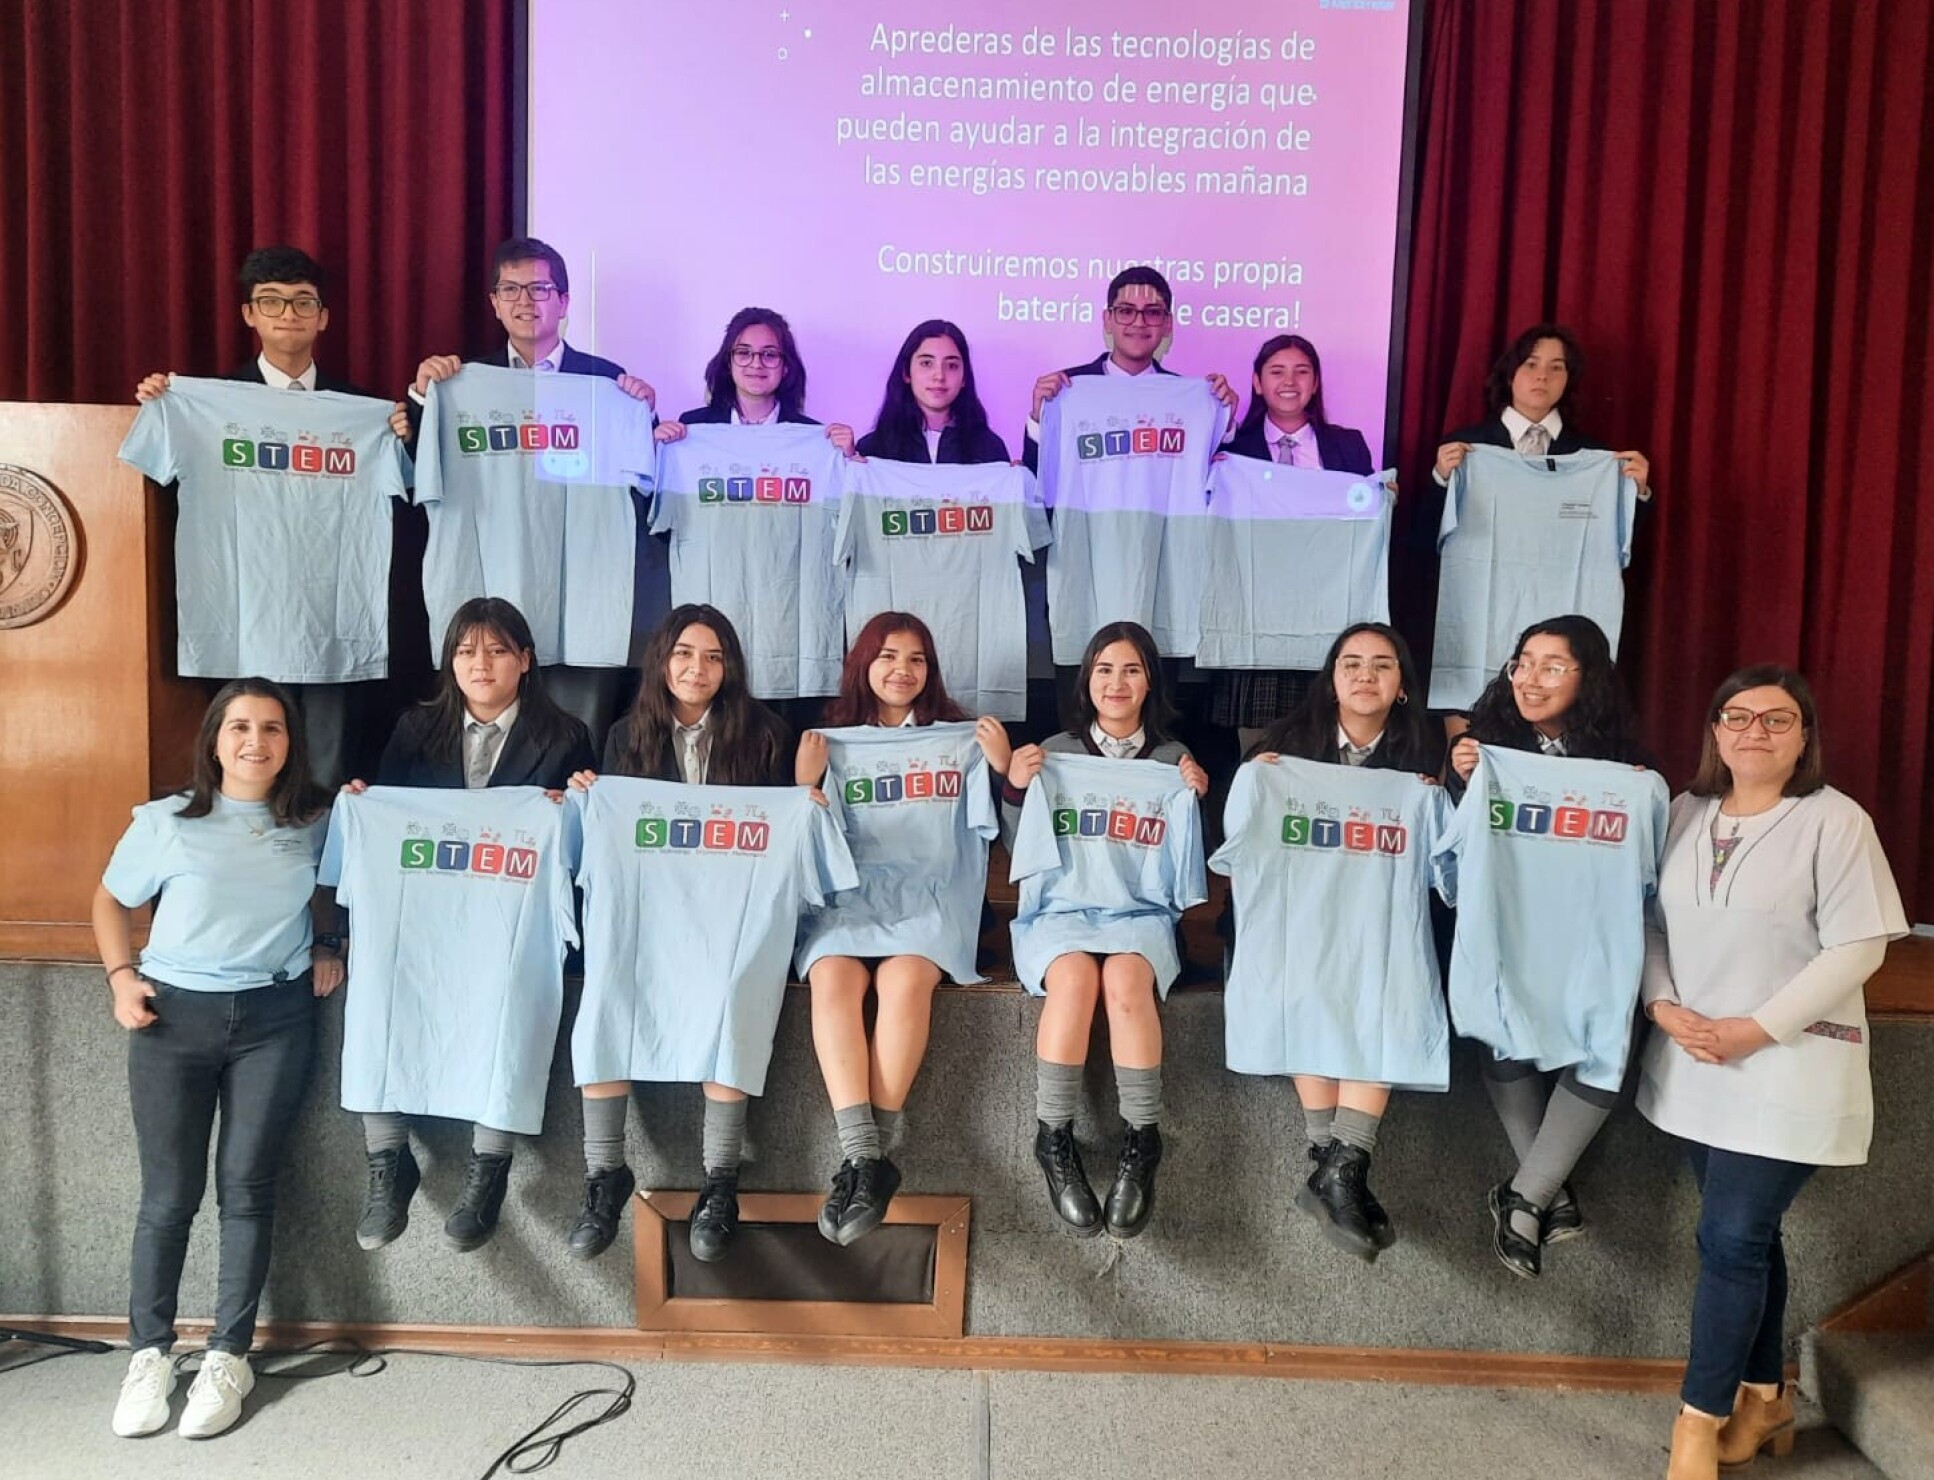 Catalina and the students smile, holding 'Women in STEM' t-shirts